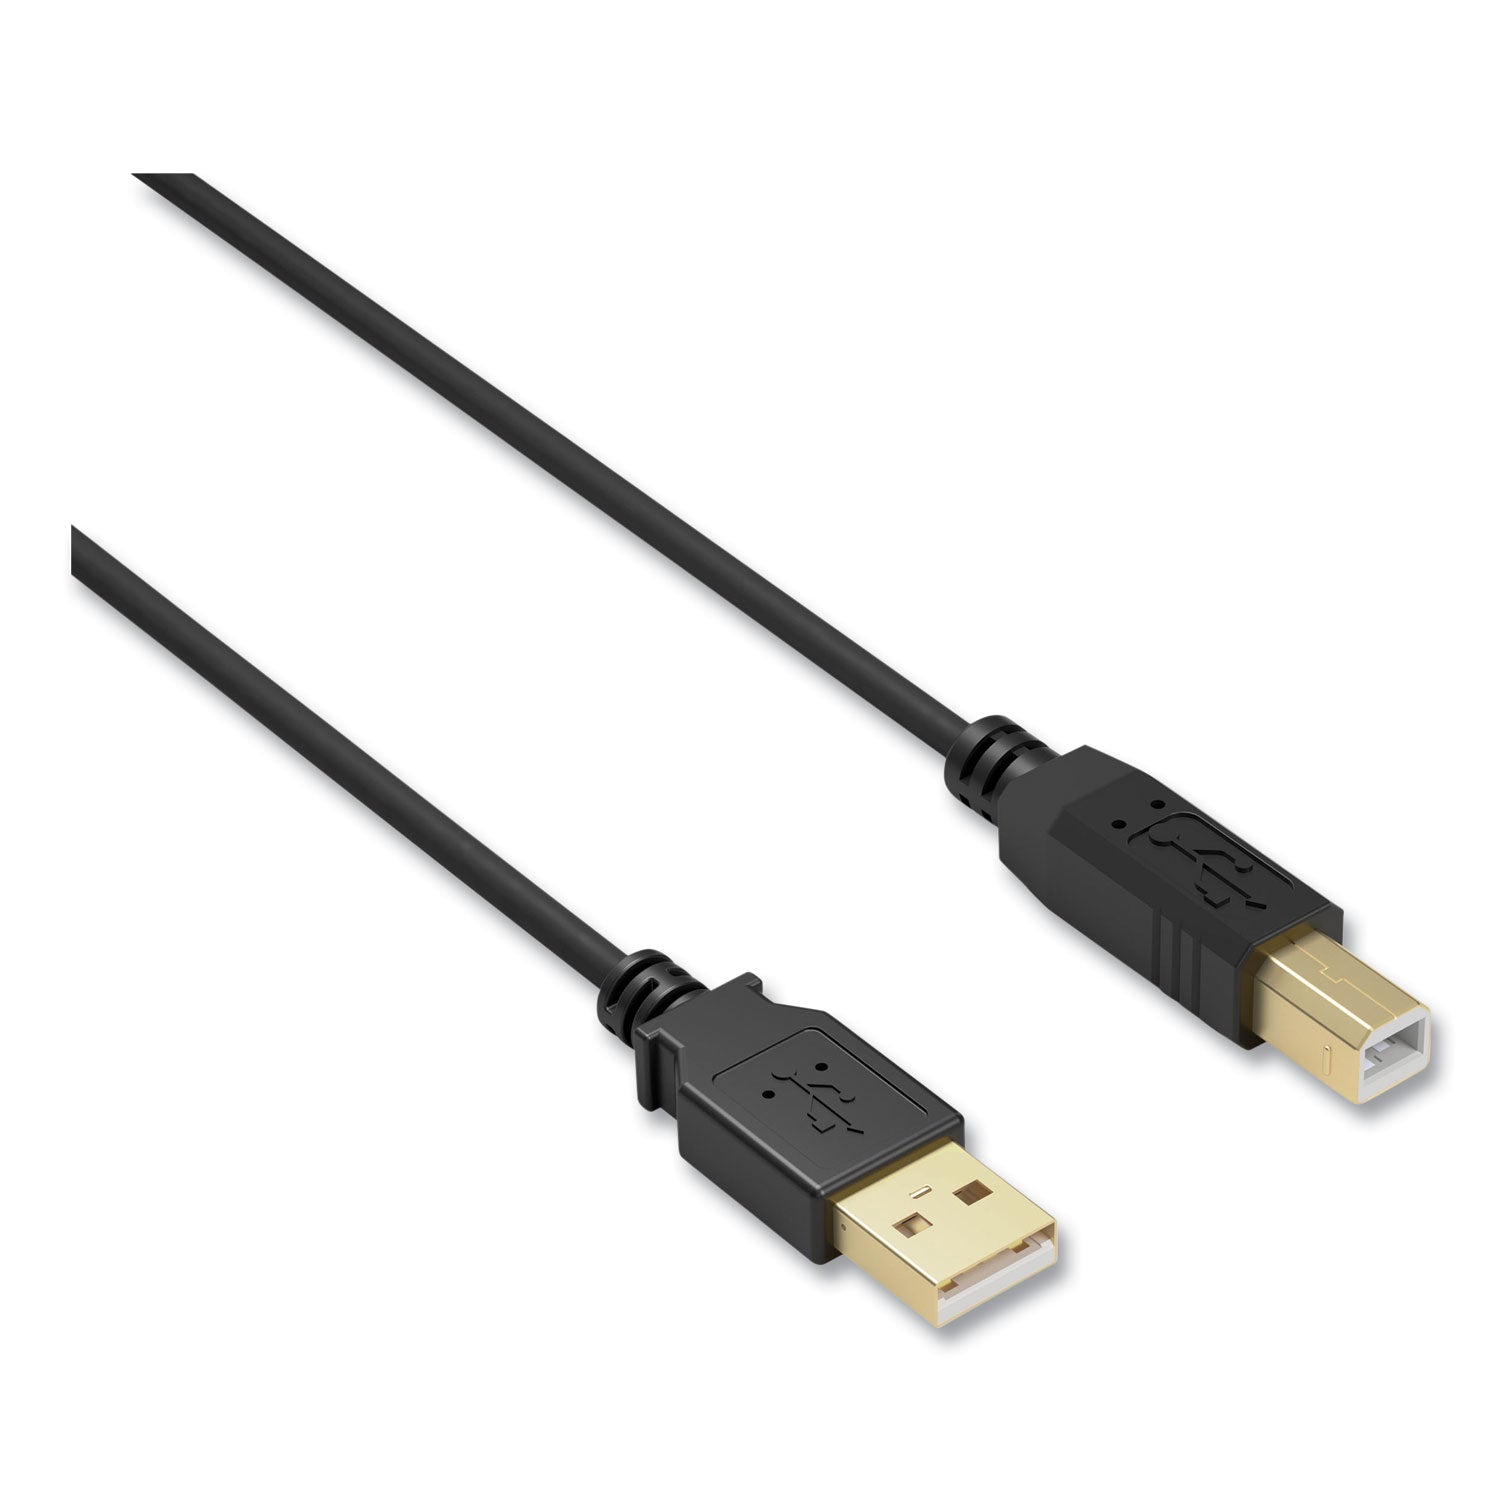 usb-printer-cable-gold-plated-connectors-16-ft-black_nxt24400026 - 1